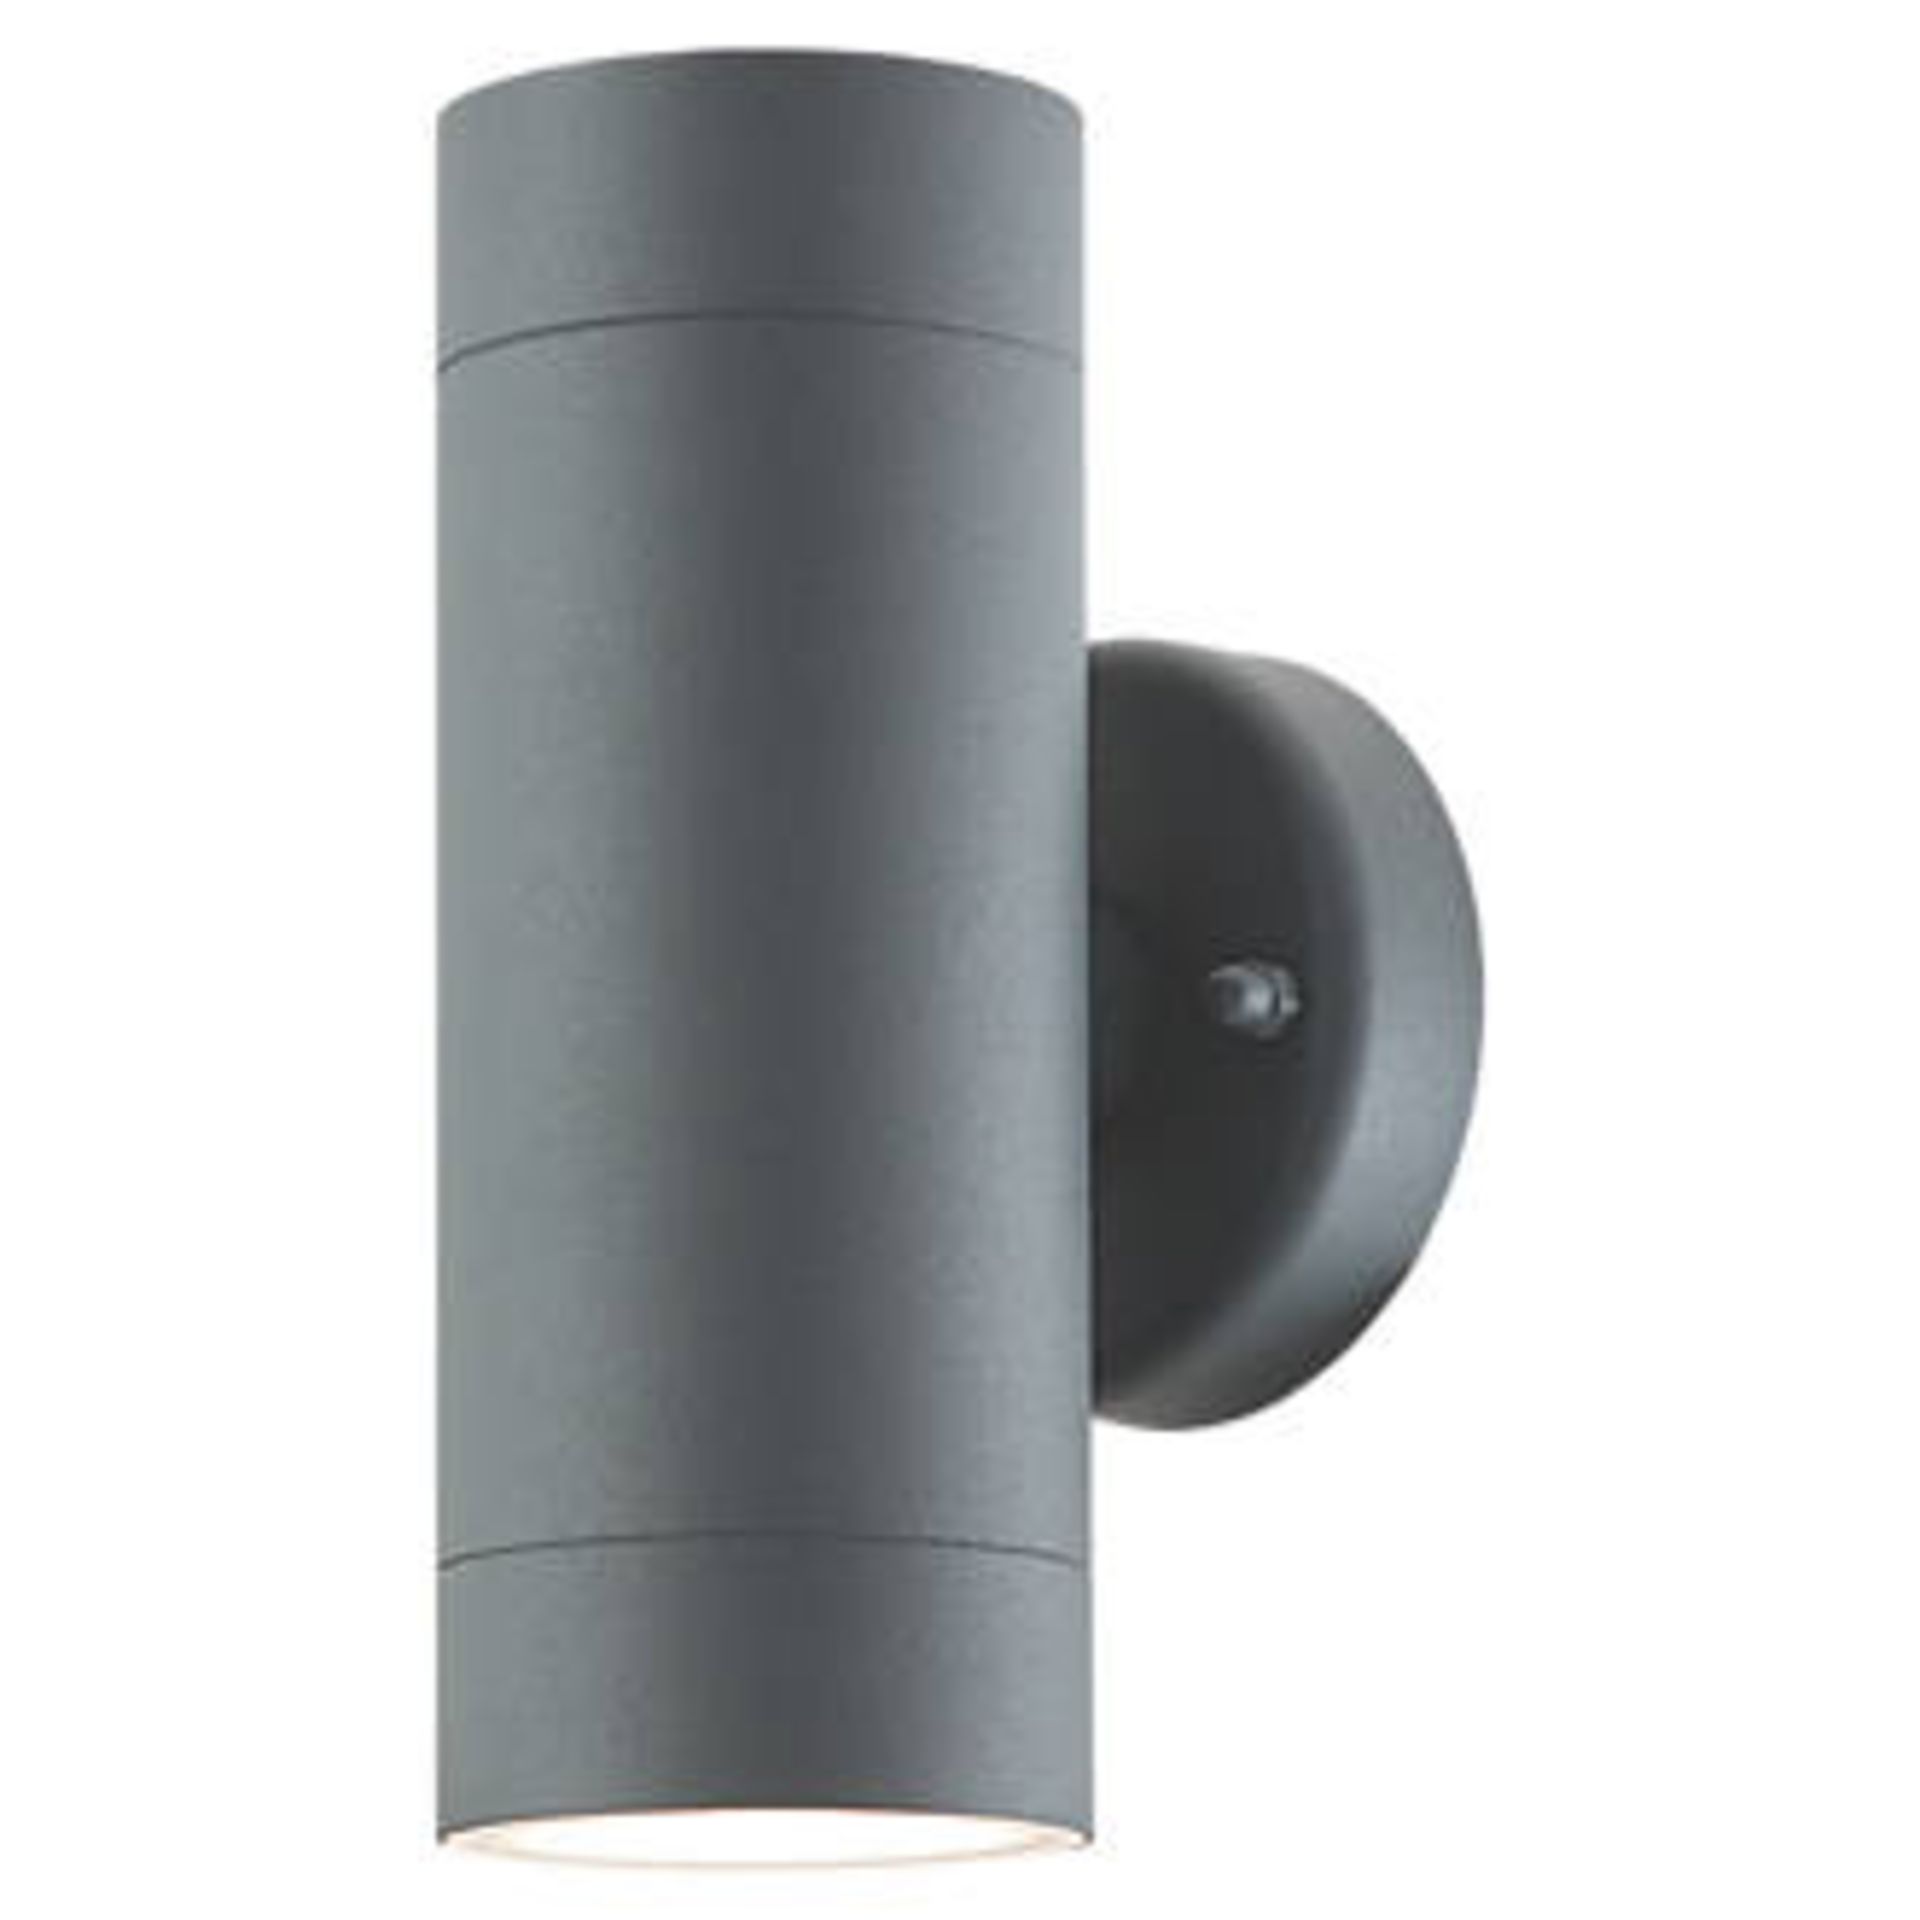 (DE31) Blooma Candiac Matt Charcoal grey Mains-powered LED Outdoor Wall light 760lm You can in... - Image 2 of 2